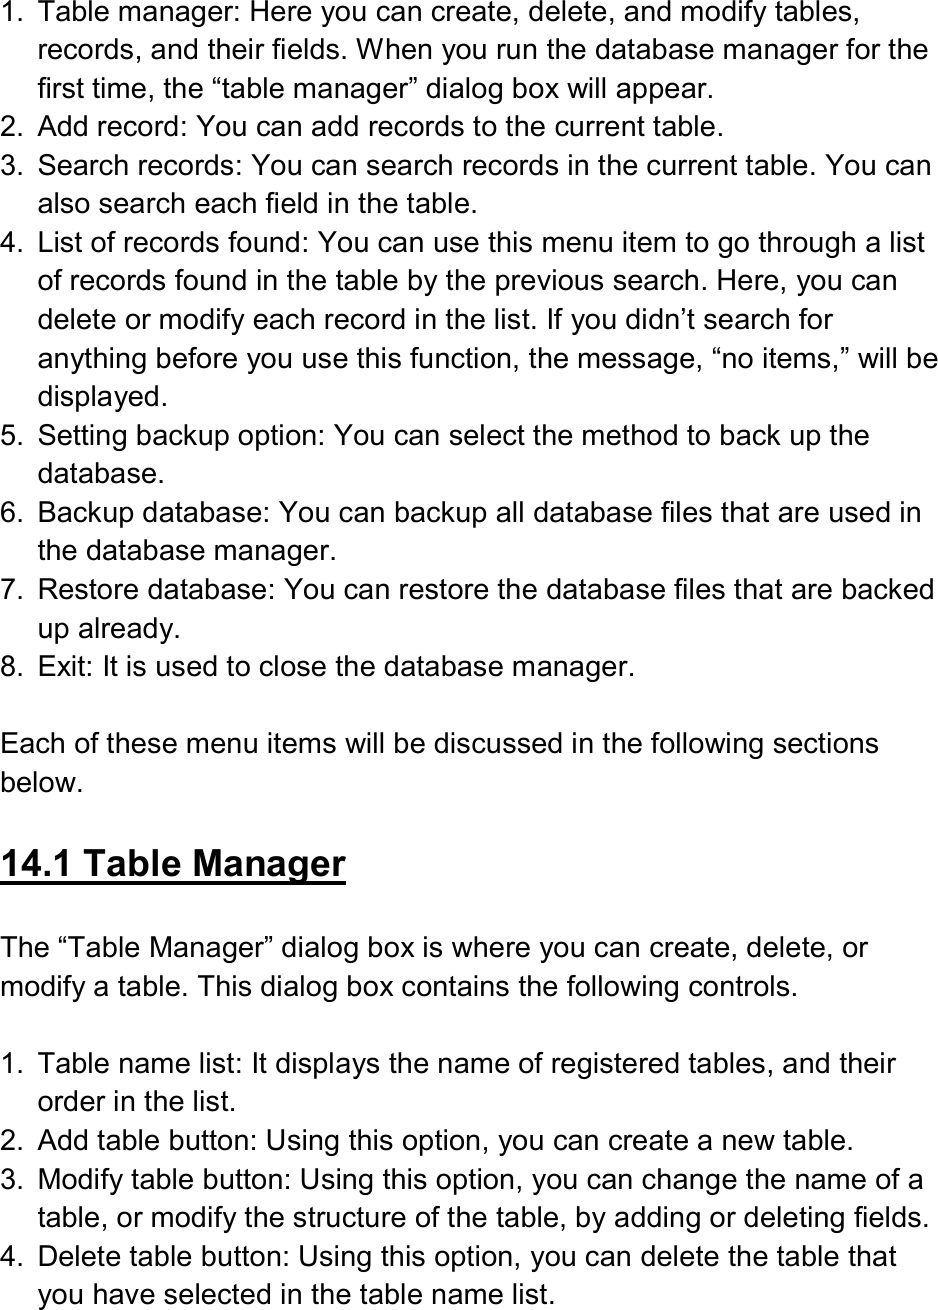   1.  Table manager: Here you can create, delete, and modify tables, records, and their fields. When you run the database manager for the first time, the “table manager” dialog box will appear. 2.  Add record: You can add records to the current table. 3.  Search records: You can search records in the current table. You can also search each field in the table. 4.  List of records found: You can use this menu item to go through a list of records found in the table by the previous search. Here, you can delete or modify each record in the list. If you didn’t search for anything before you use this function, the message, “no items,” will be displayed. 5.  Setting backup option: You can select the method to back up the database. 6.  Backup database: You can backup all database files that are used in the database manager. 7.  Restore database: You can restore the database files that are backed up already. 8.  Exit: It is used to close the database manager.  Each of these menu items will be discussed in the following sections below.  14.1 Table Manager  The “Table Manager” dialog box is where you can create, delete, or modify a table. This dialog box contains the following controls.  1.  Table name list: It displays the name of registered tables, and their order in the list. 2.  Add table button: Using this option, you can create a new table. 3.  Modify table button: Using this option, you can change the name of a table, or modify the structure of the table, by adding or deleting fields. 4.  Delete table button: Using this option, you can delete the table that you have selected in the table name list. 